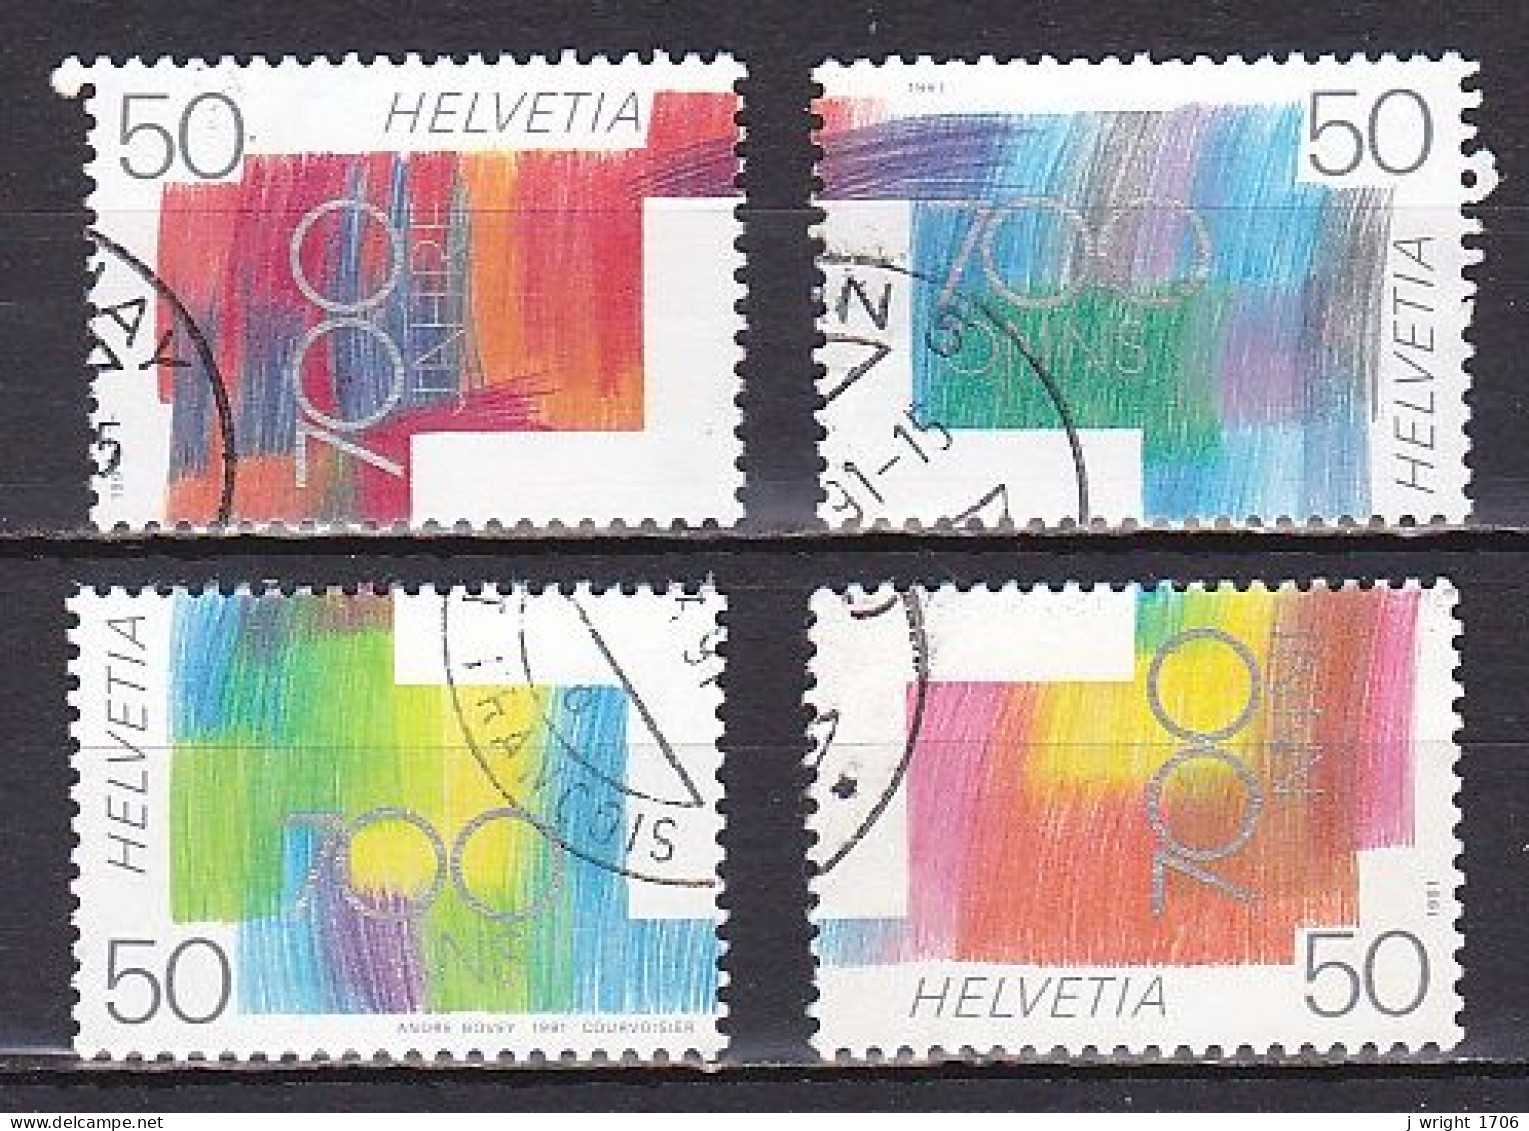 Switzerland, 1991, Swiss Conferderation 700th Anniv, Set, USED - Used Stamps